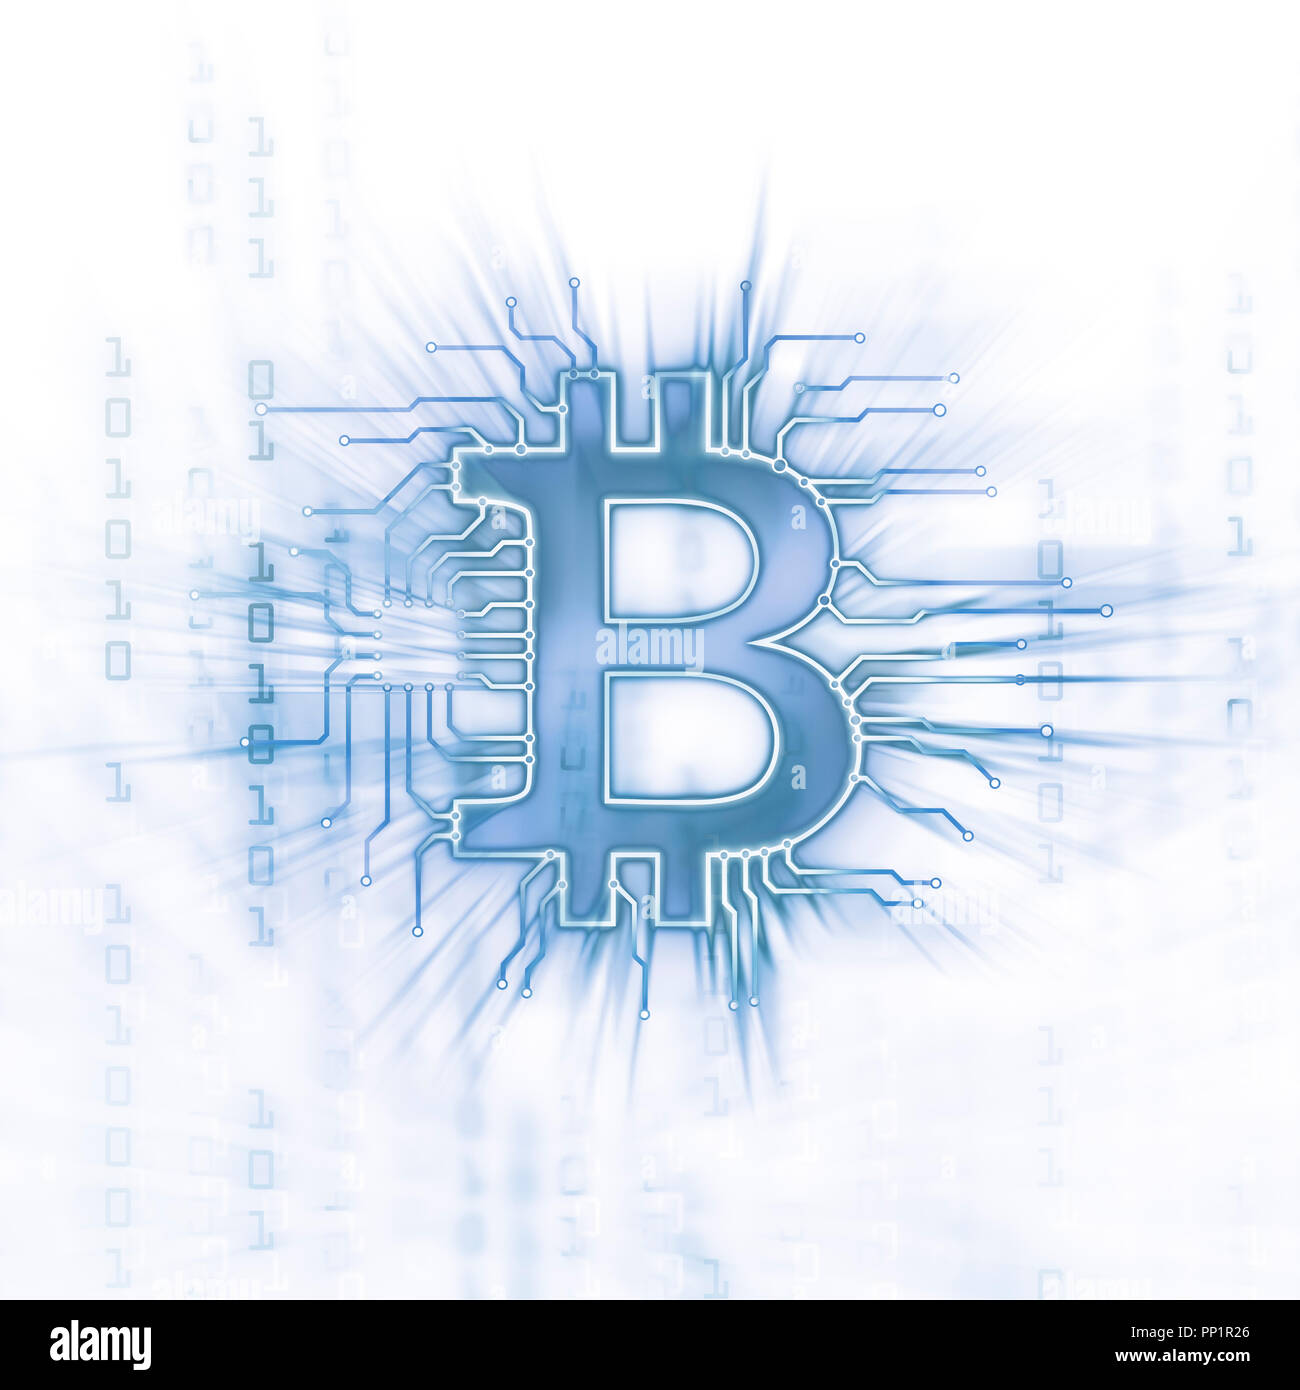 Bitcoin ₿ cryptocurrency, digital decentralized currency symbol conceptual illustration, bitcoin logo connected to a blockchain network. Blue on white Stock Photo